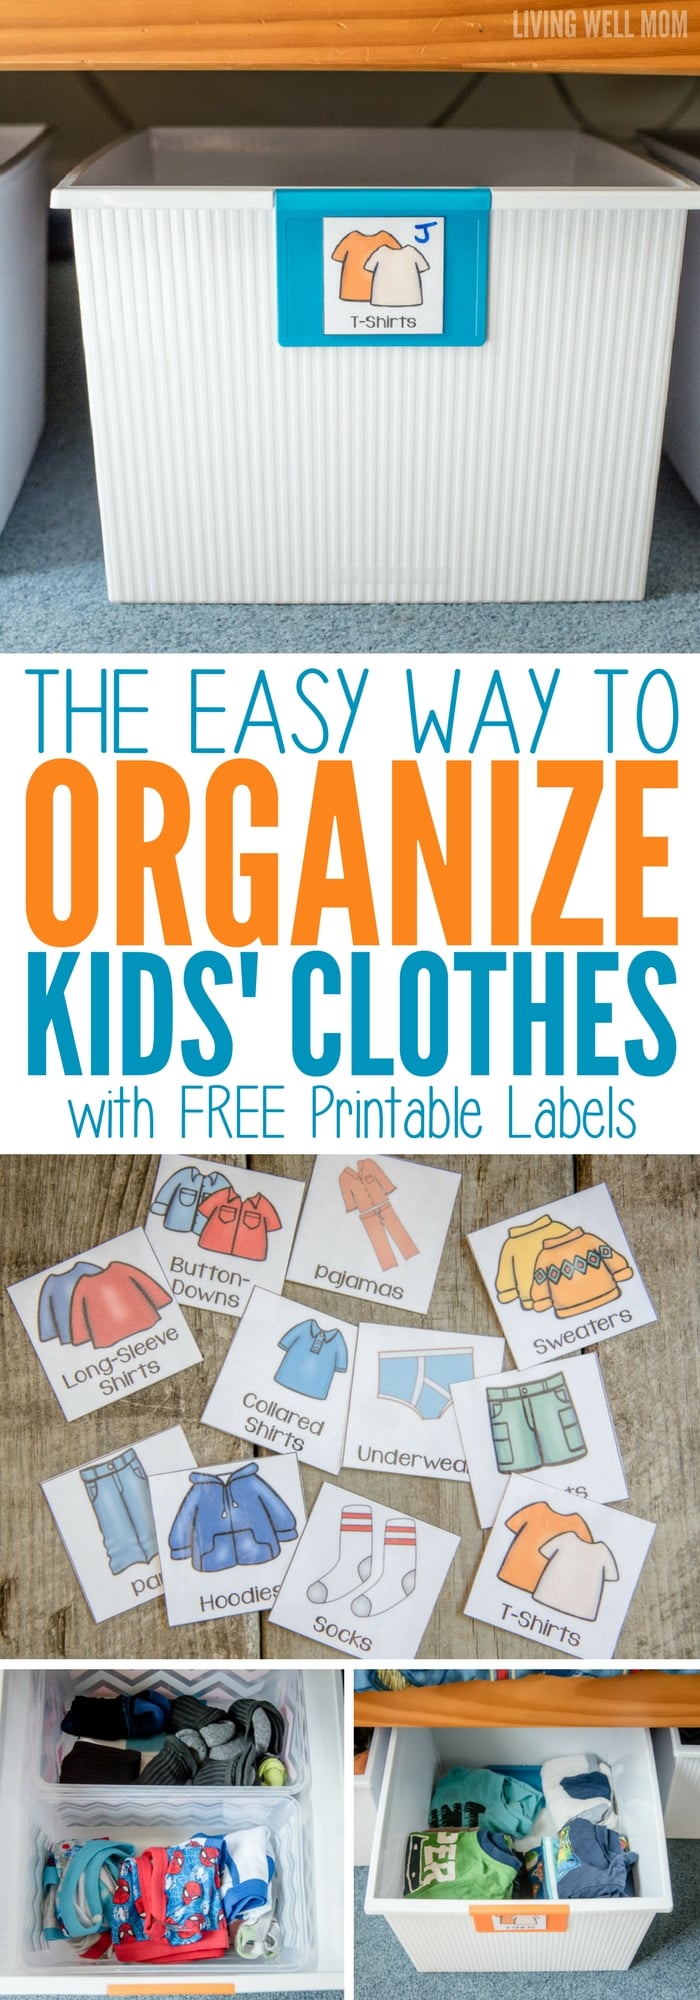 The Easy Way To Organize Kids Clothes With Free Printable Labels